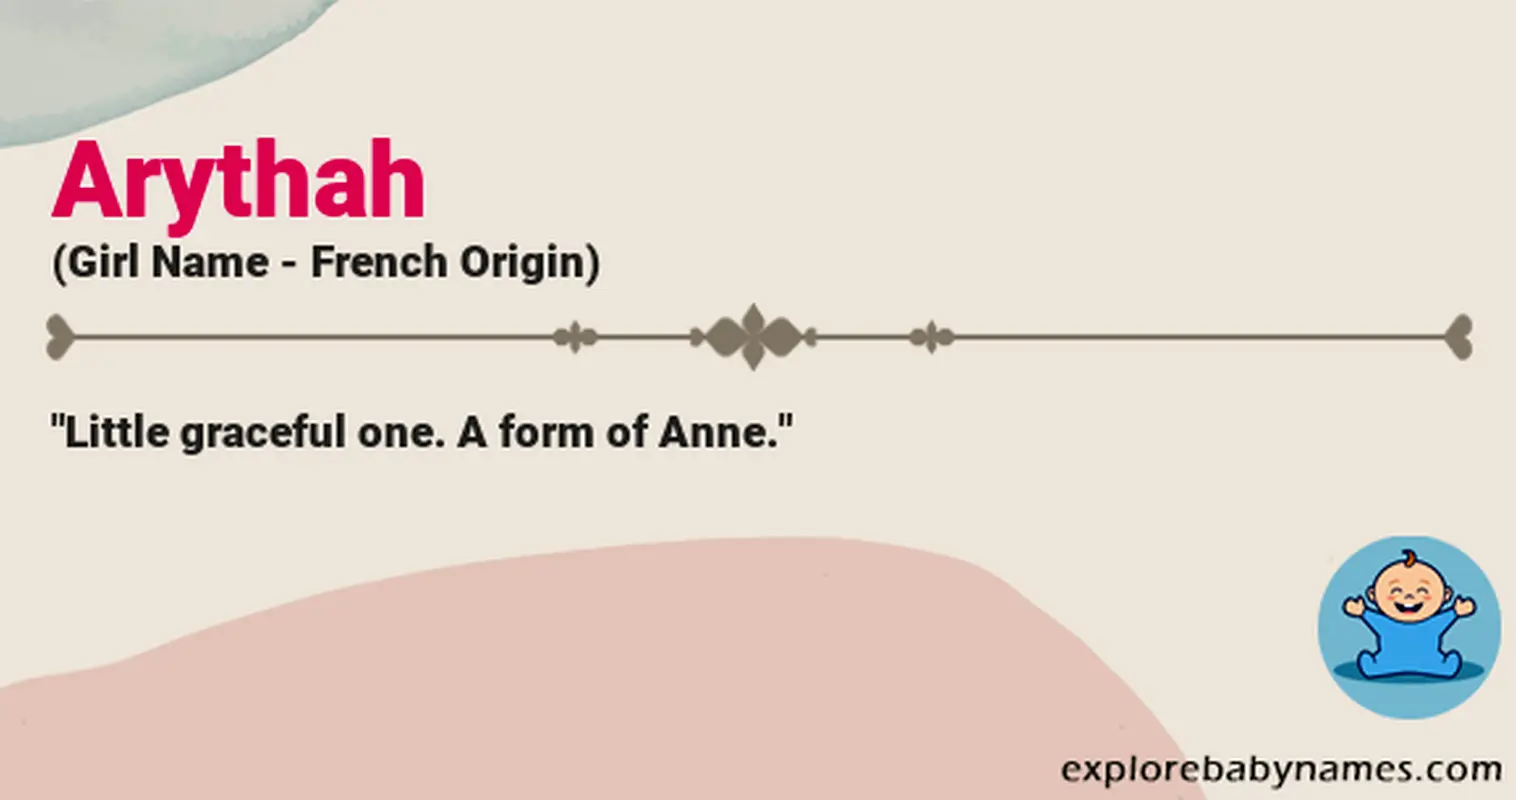 Meaning of Arythah